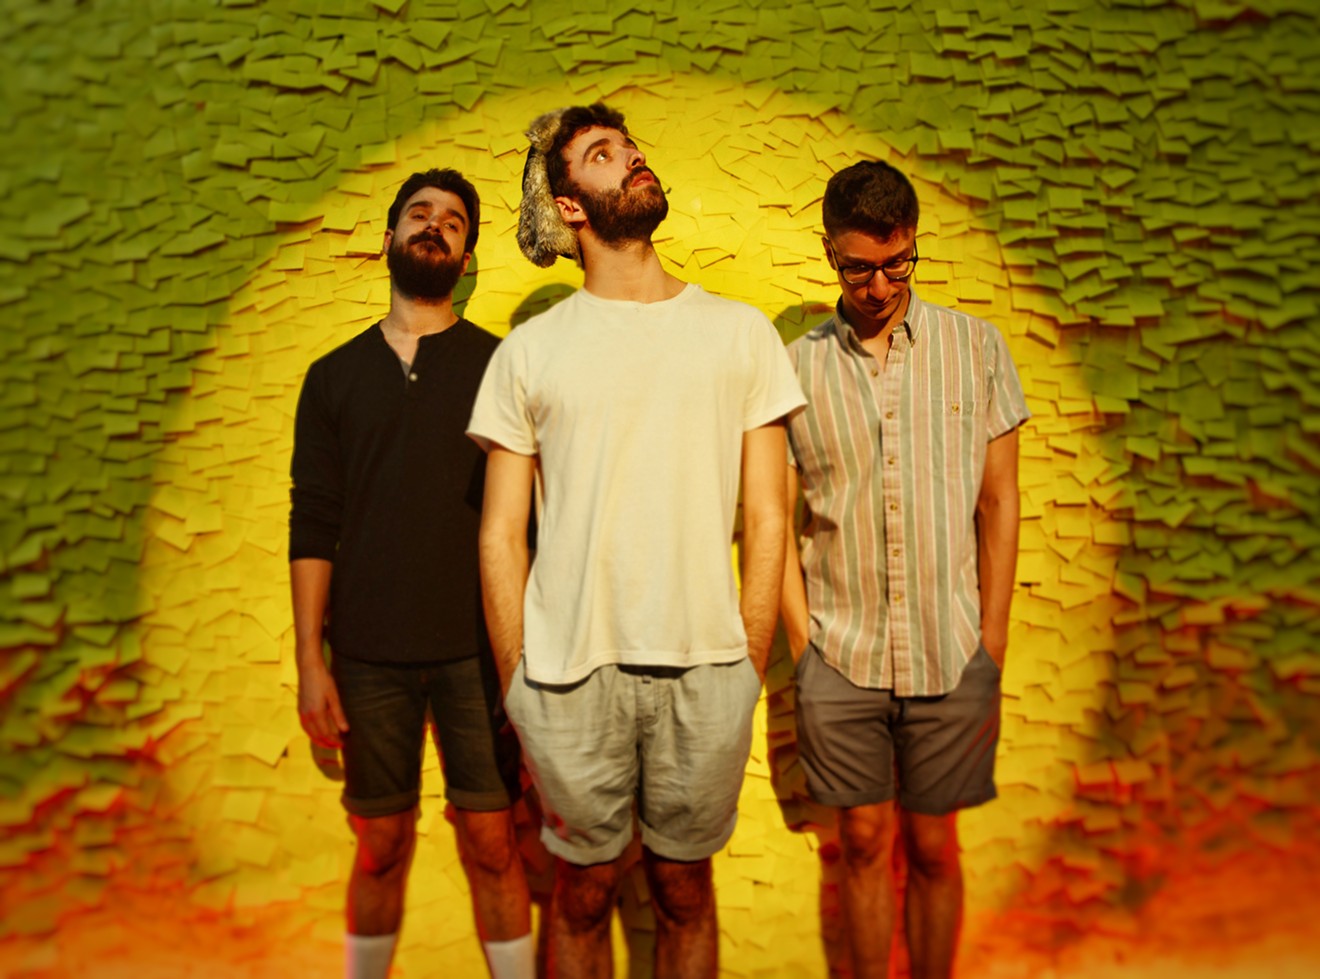 Indie pop band AJR releases new single